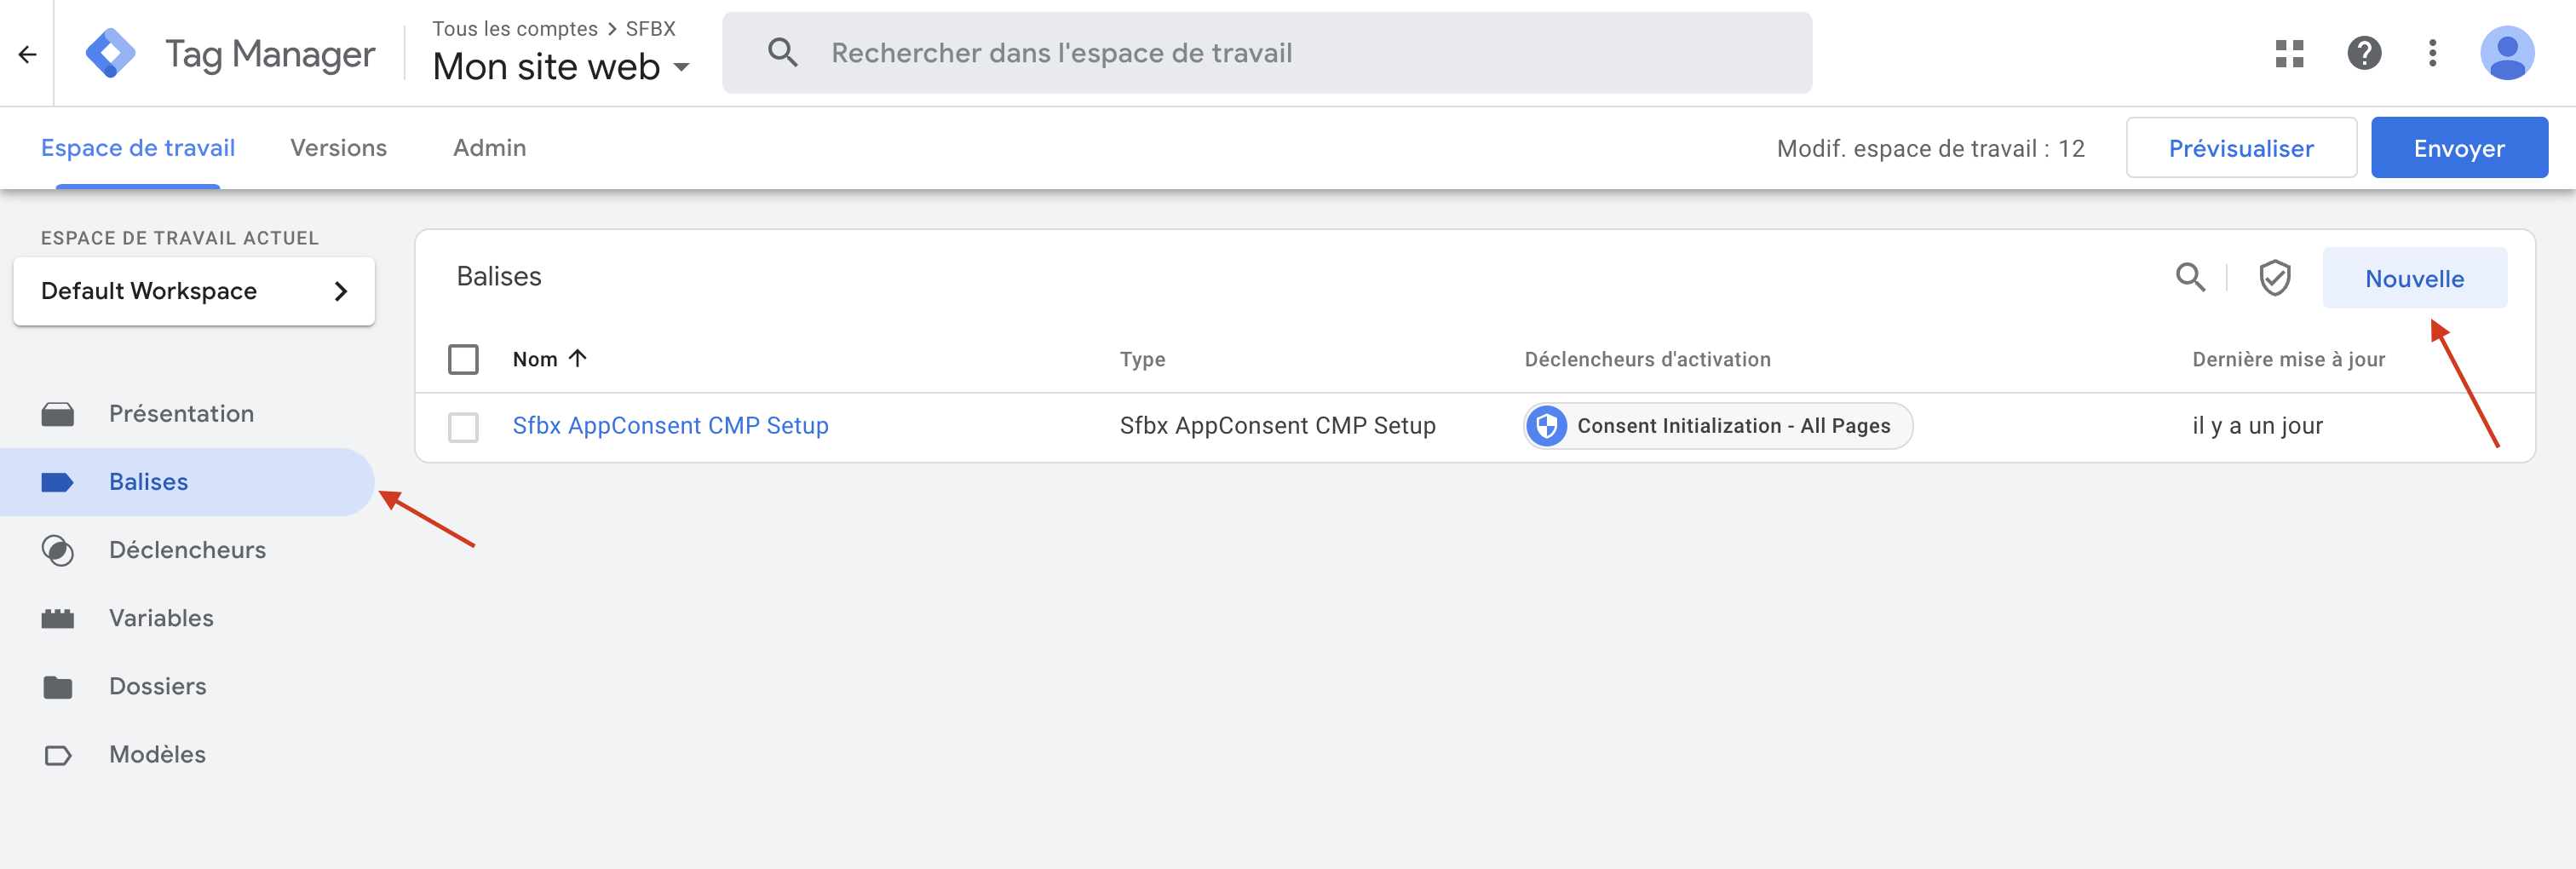 Google Tag Manager ajout tag pour event